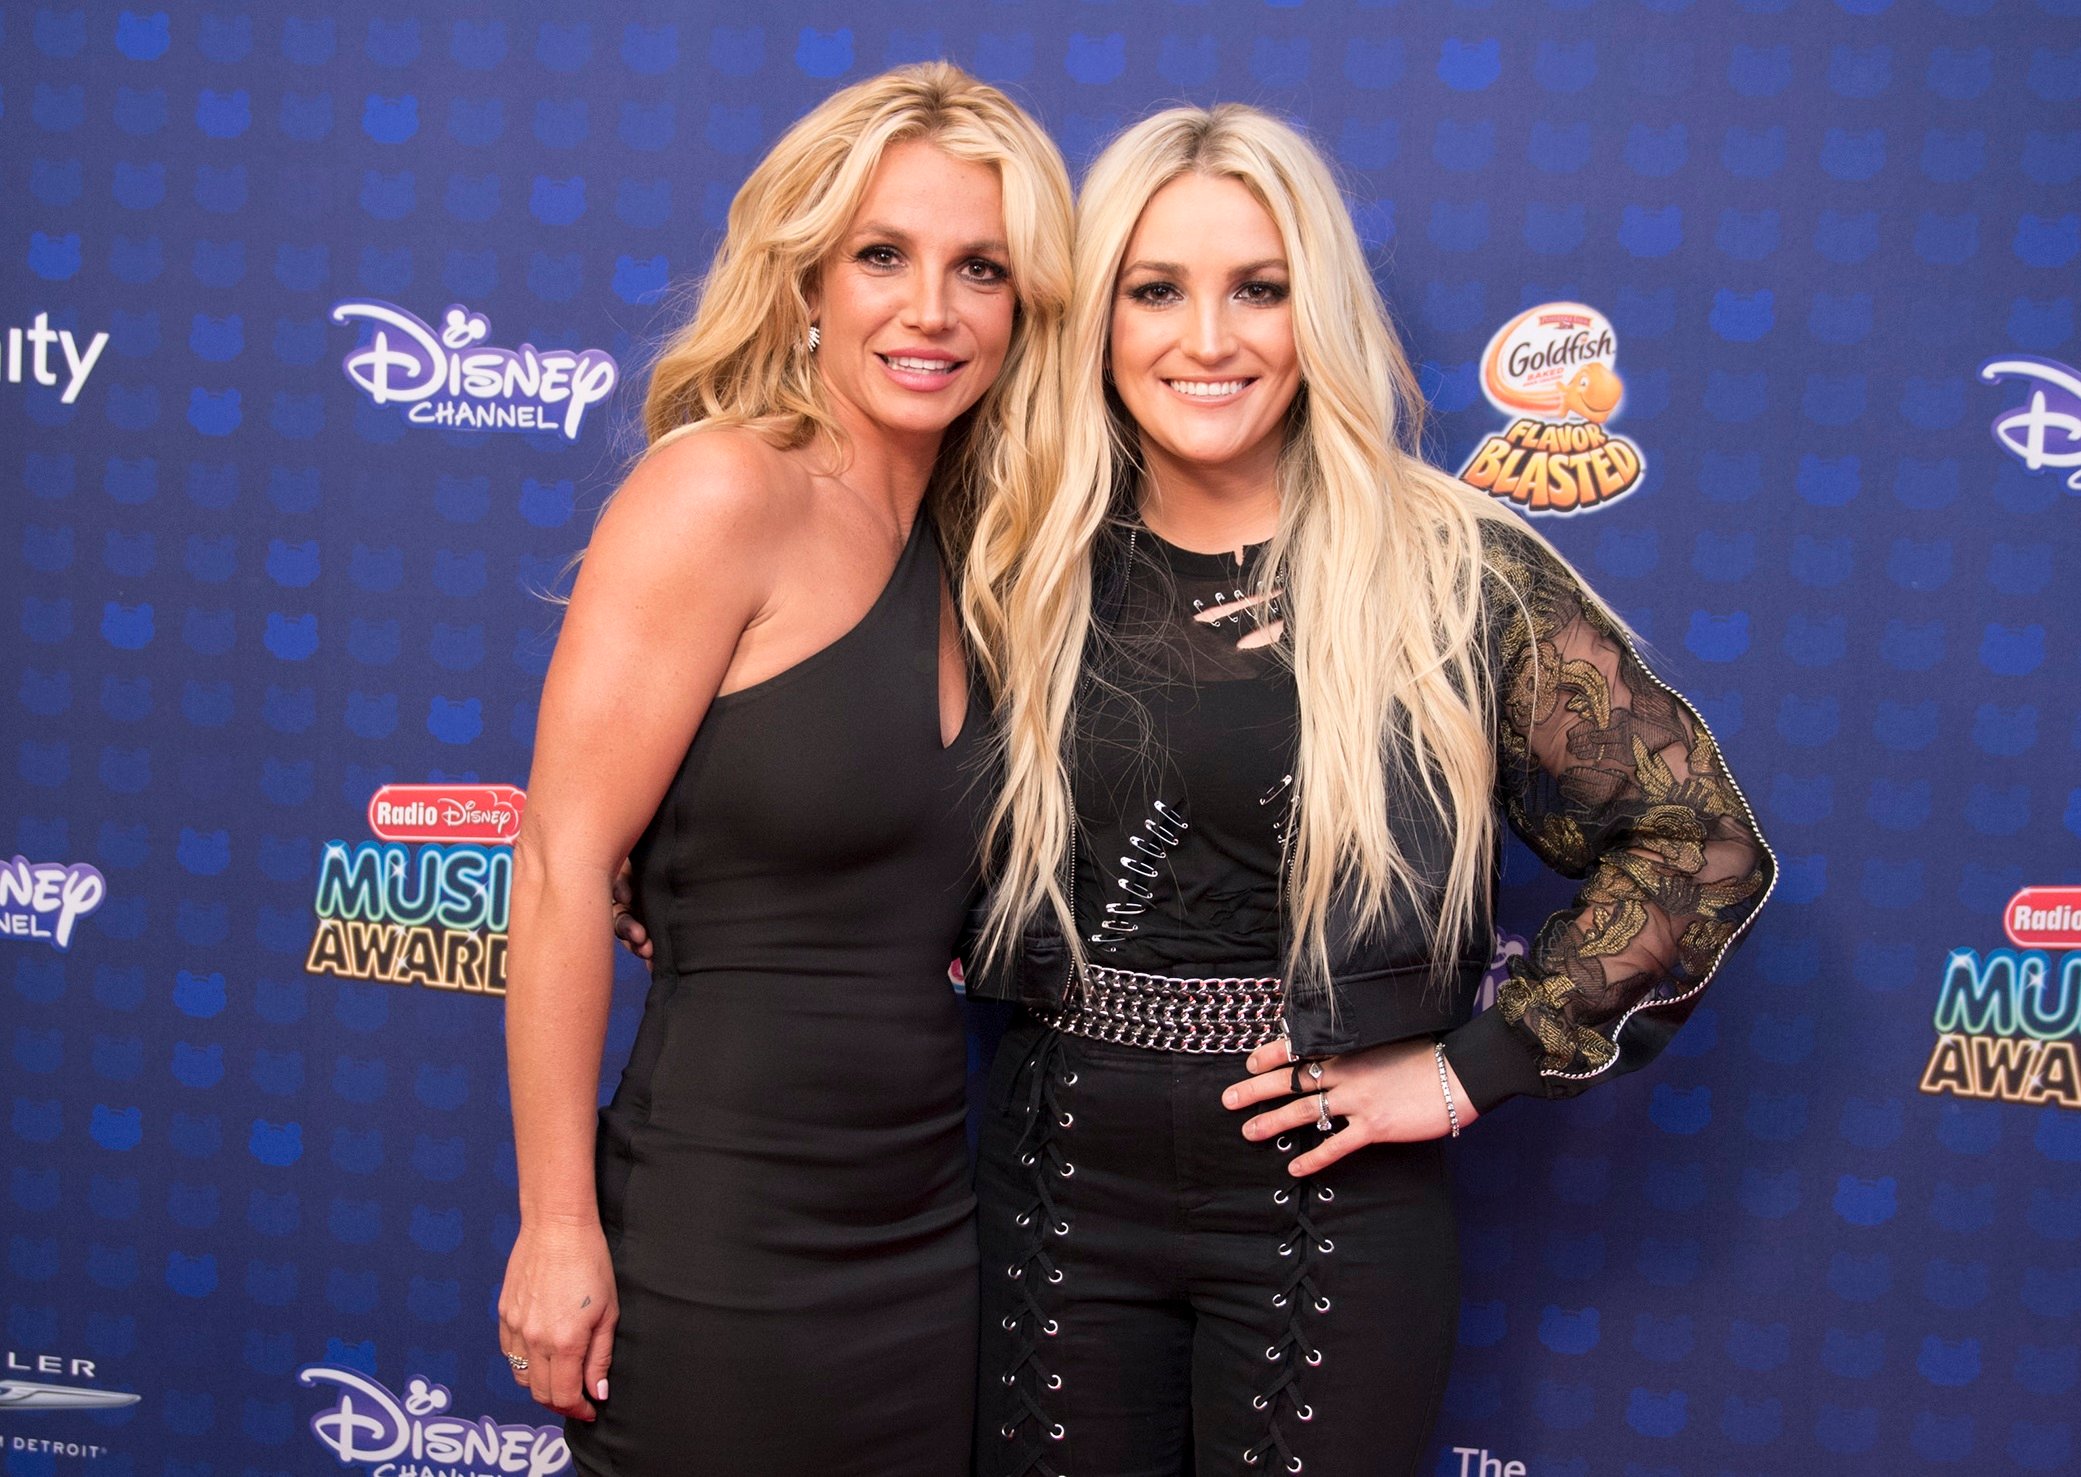 Britney Spears and Jamie Lynn Spears at the 2017 Radio Disney Music Awards